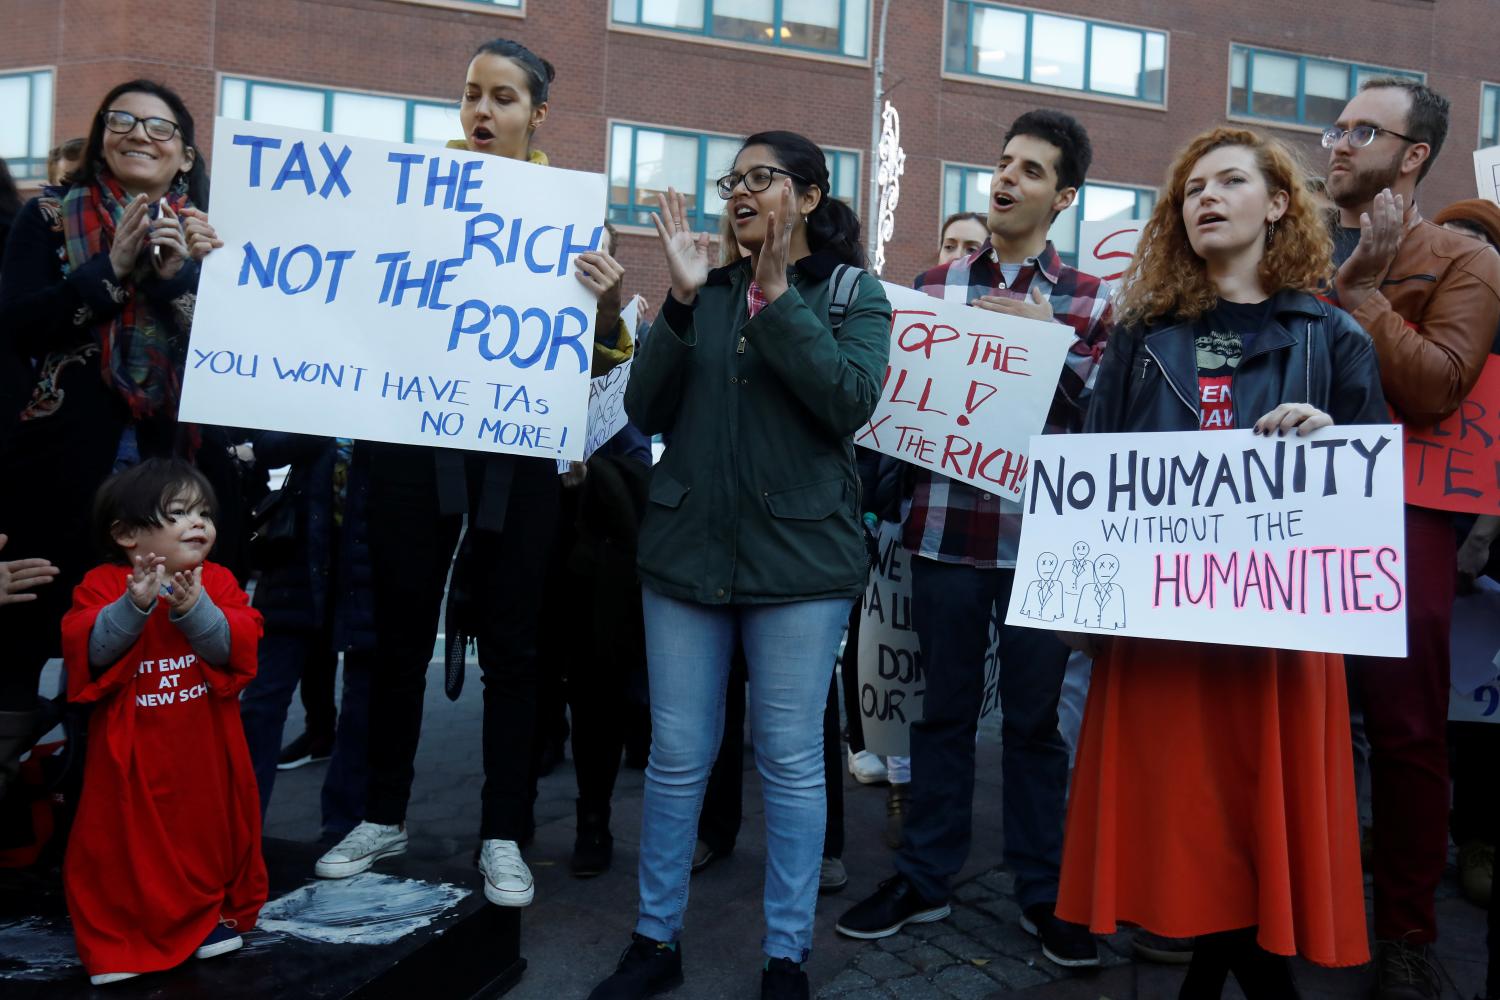 Graduate students and others rally against the proposed GOP tax reform bill at Union Square in the Manhattan borough of New York City, New York, U.S., November 29, 2017. REUTERS/Shannon Stapleton - RC1BAA1EABA0